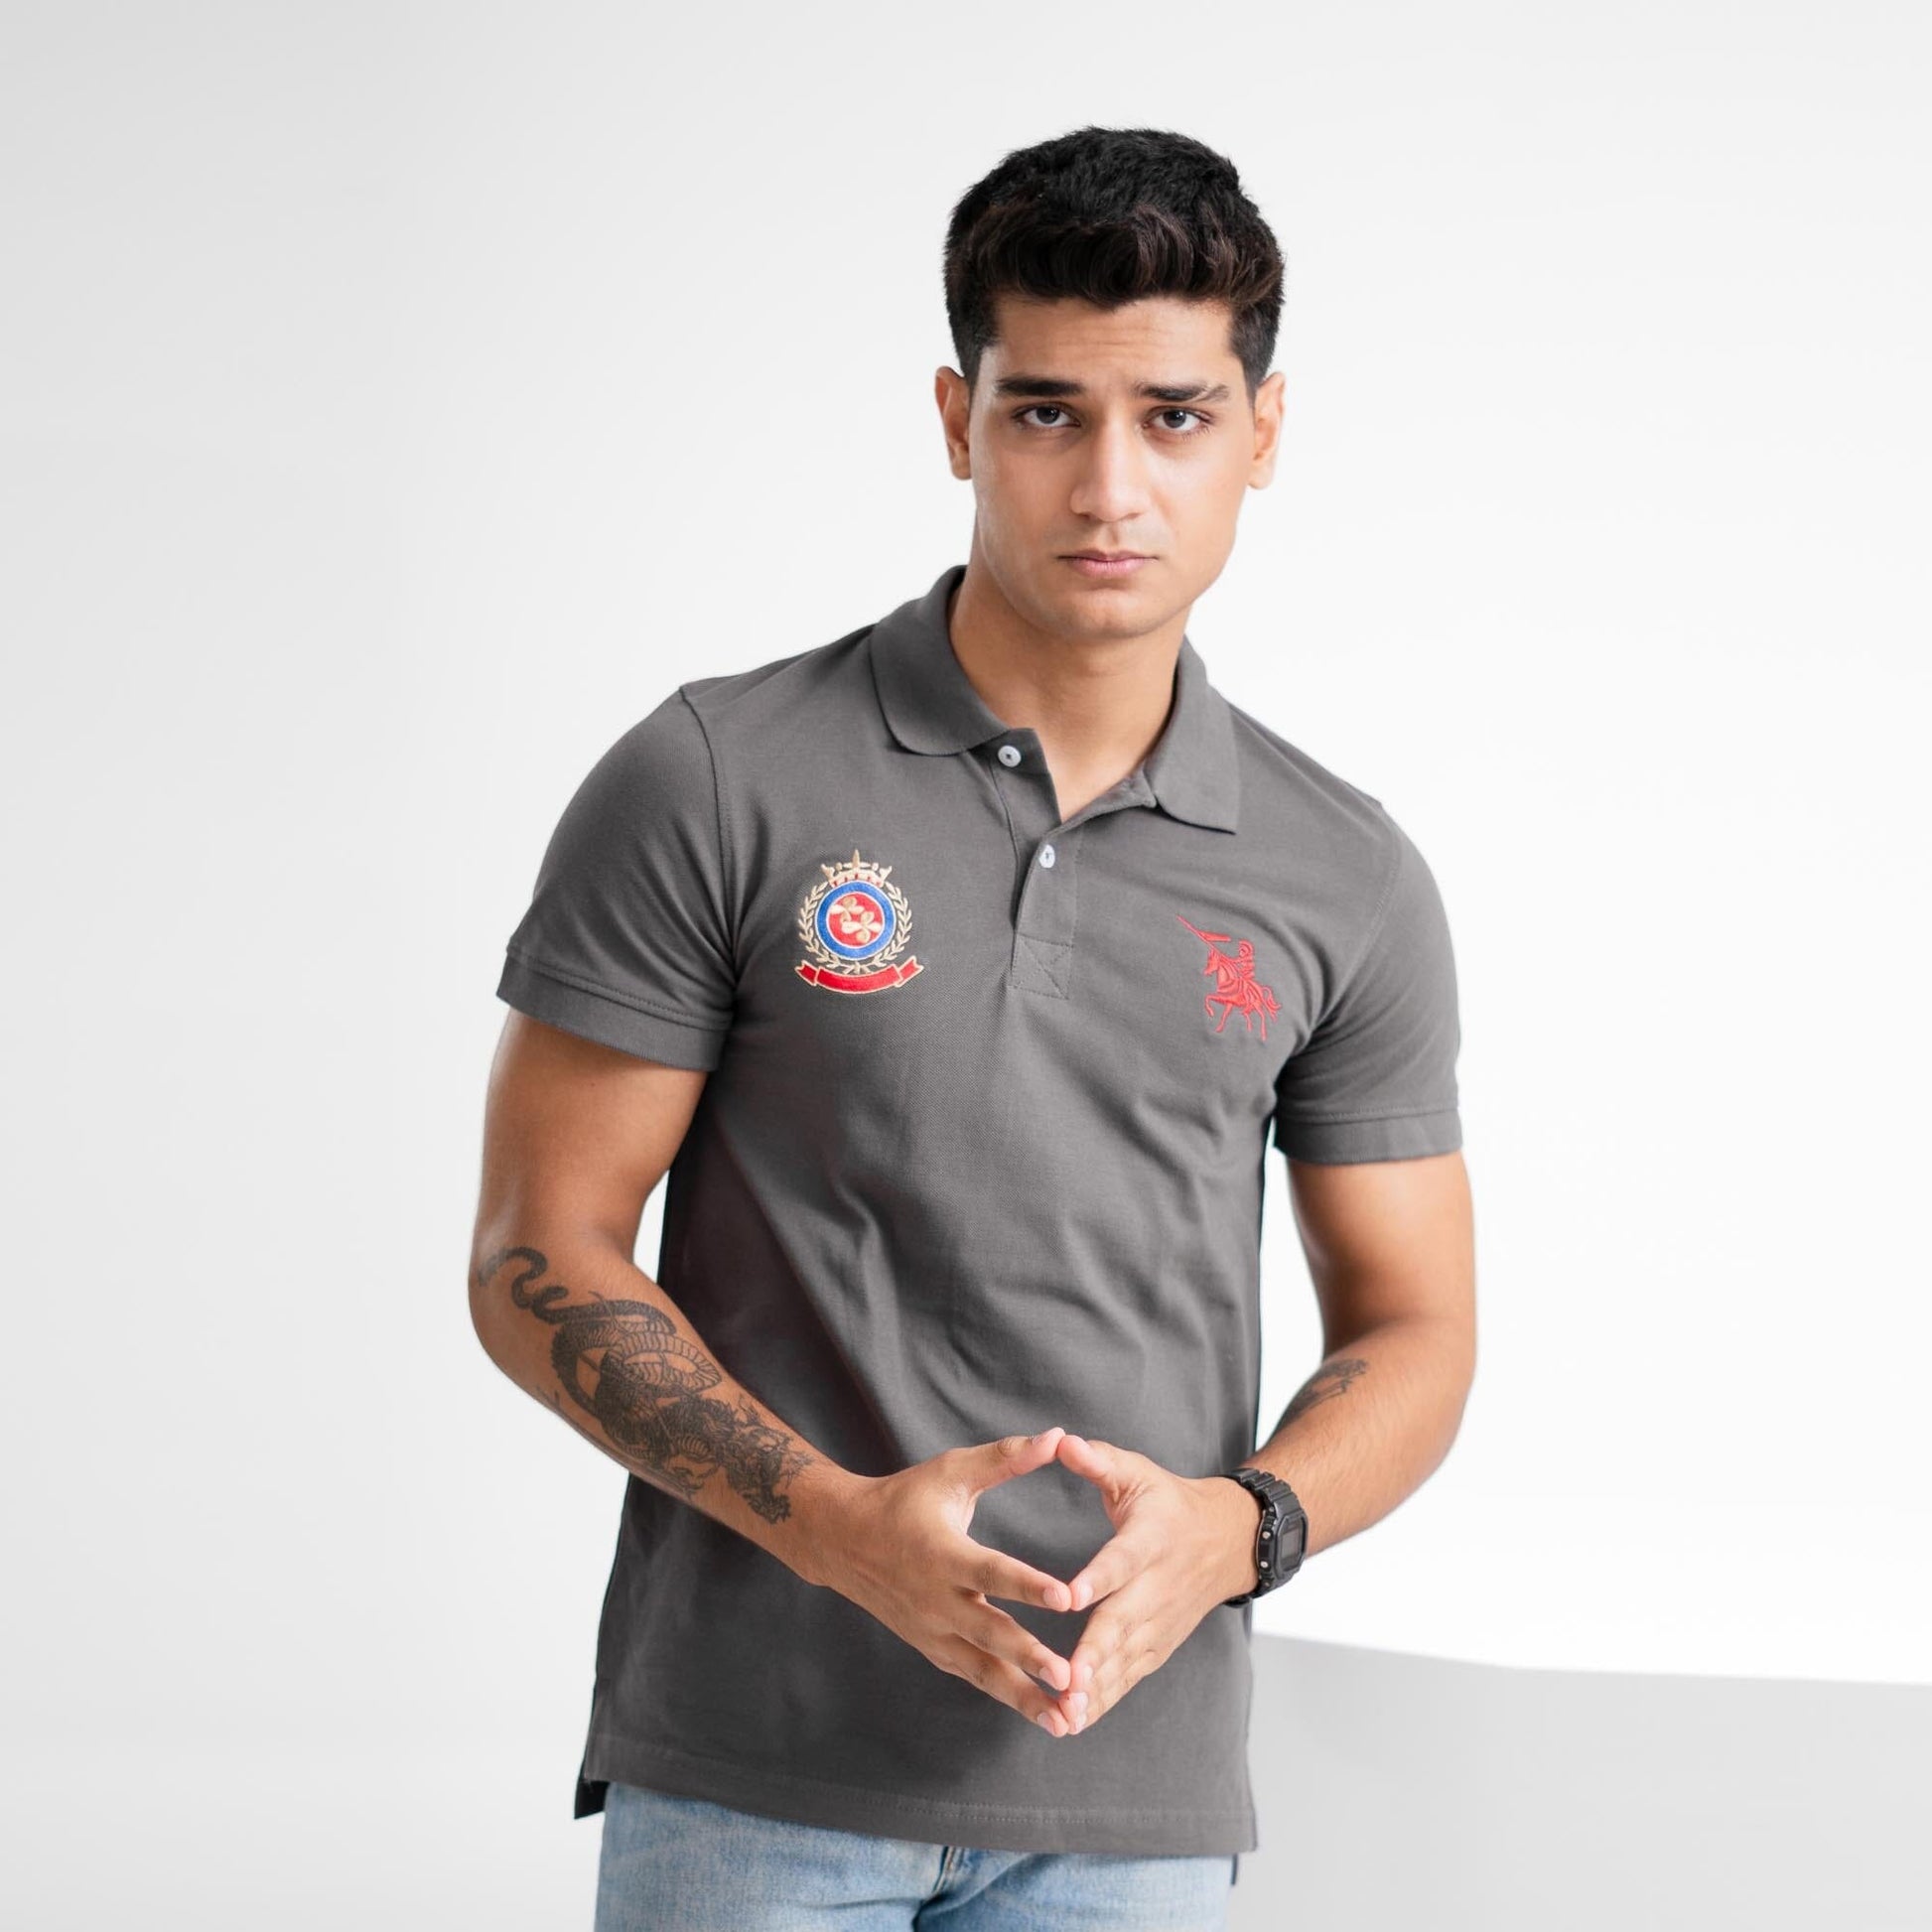 Polo Republica Men's Double Pony & LV Crest Embroidered Polo Shirt